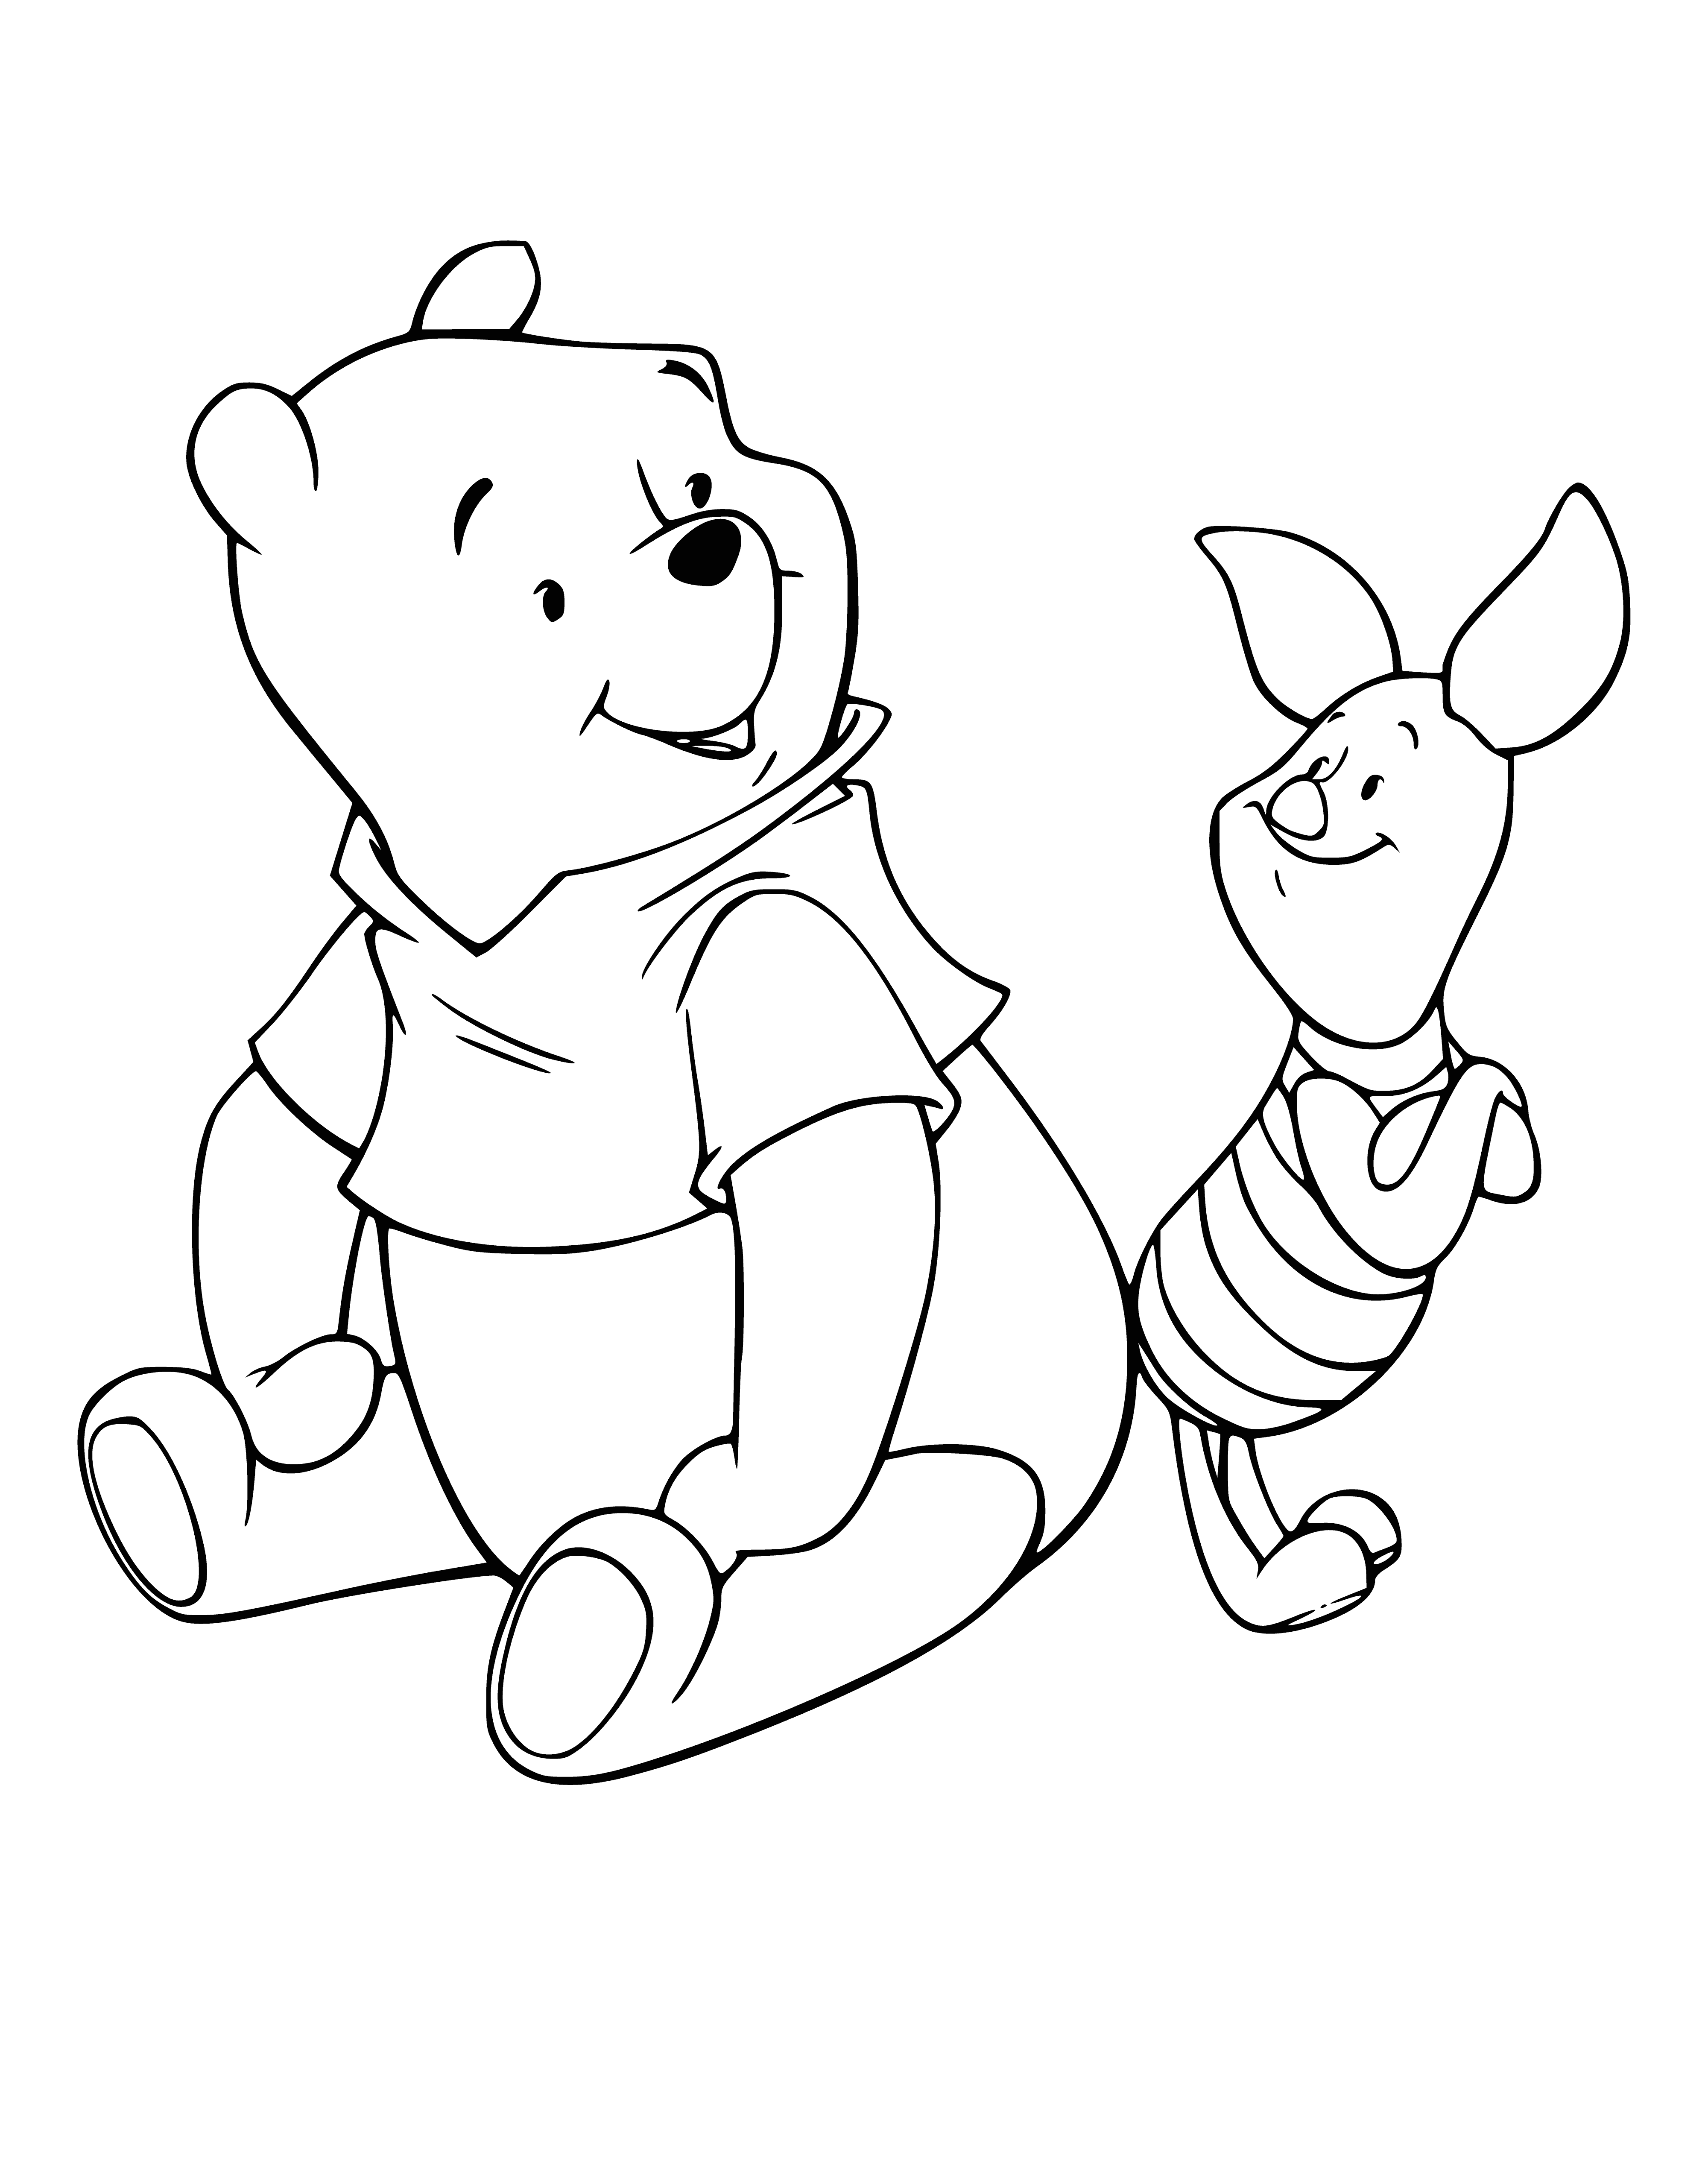 coloring page: A bear & pig sit in a chair, bear reading & pointing to words as the pig looks on with a smile. Nearby: a table with a teapot & two cups.